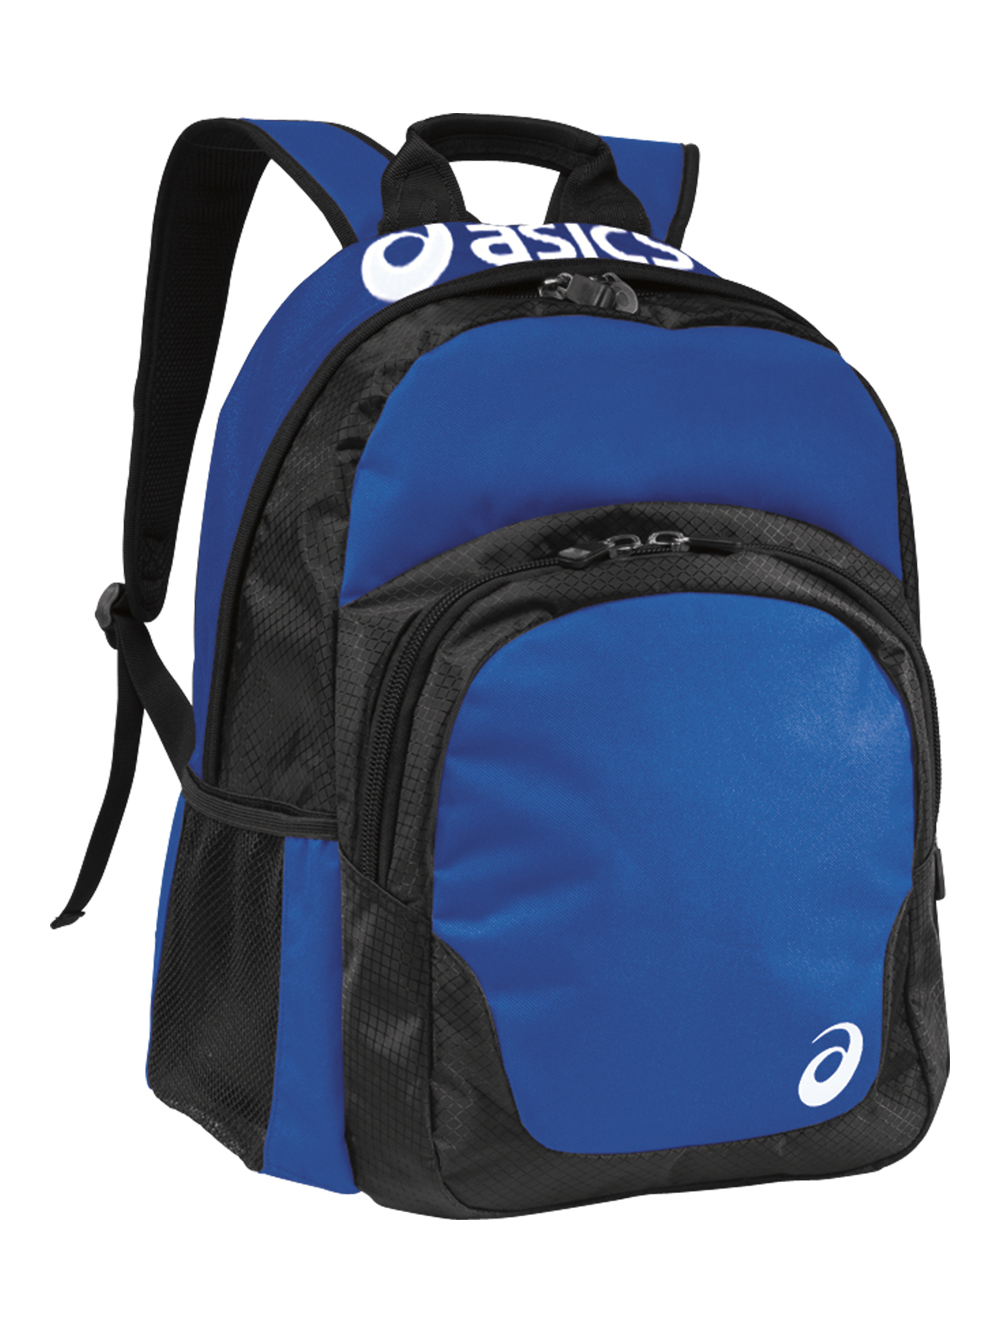 Cosquillas Doblez gravedad Asics Team Backpack | Midwest Volleyball Warehouse